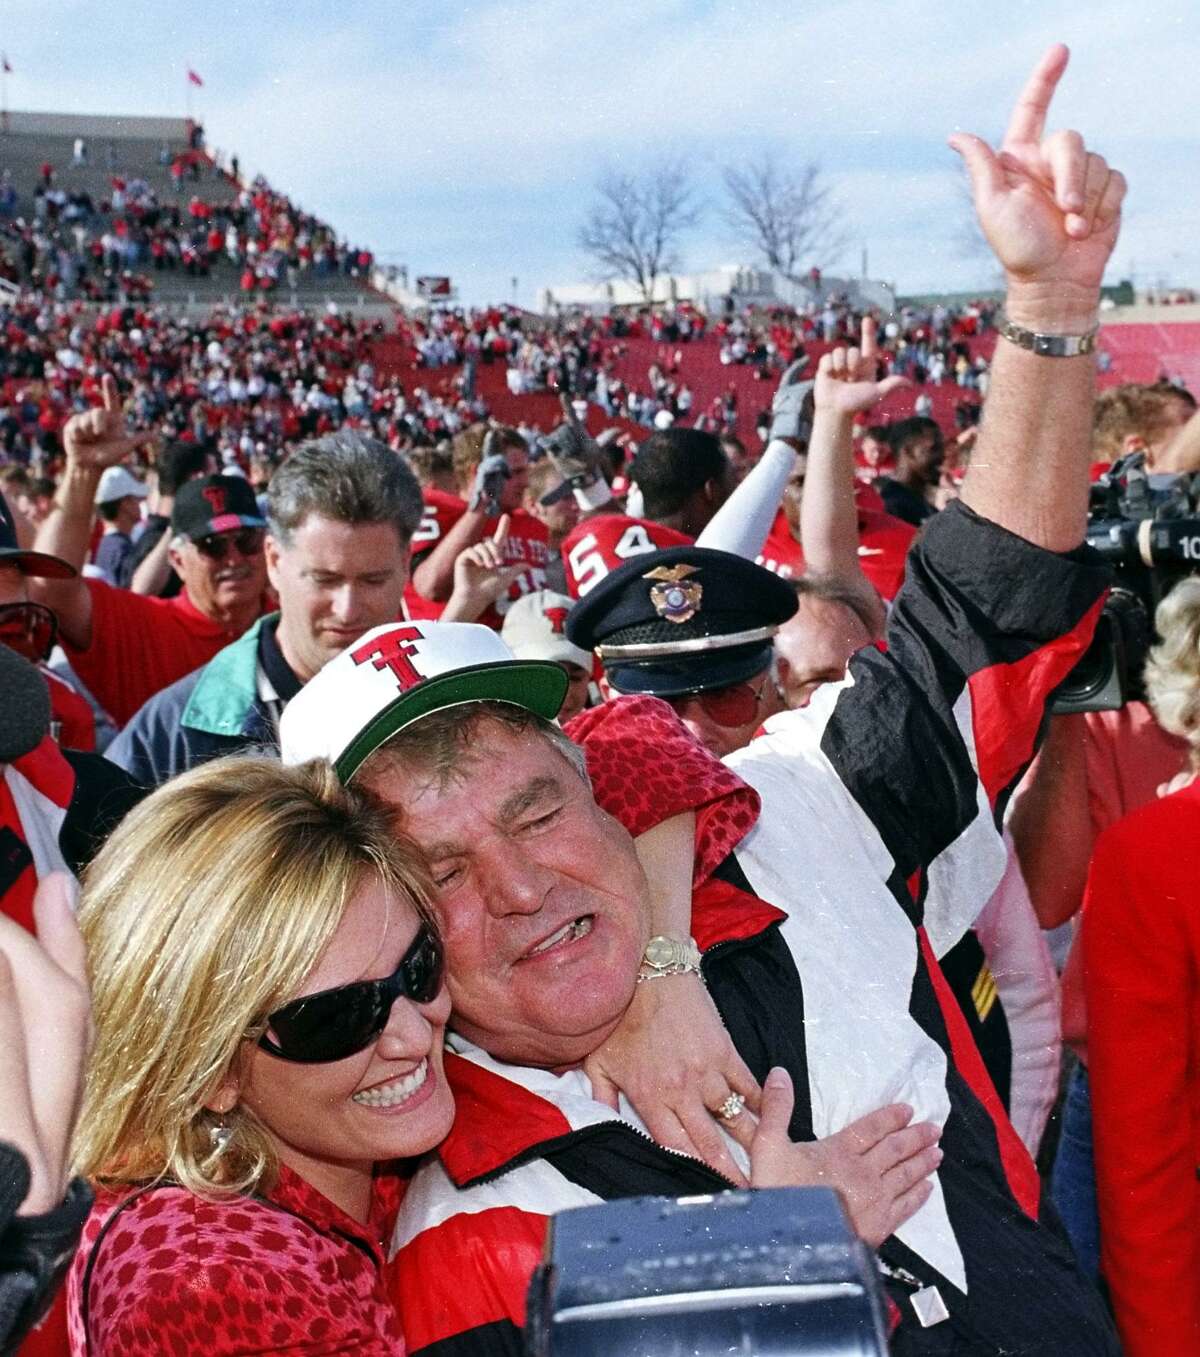 Texas Tech head coach Spike Dykes gets a hug from his daughter after the Red Raiders’ victory on Nov. 20, 1999, over the Oklahoma Sooners in Lubbock. It was Dykes’ last game with Tech.